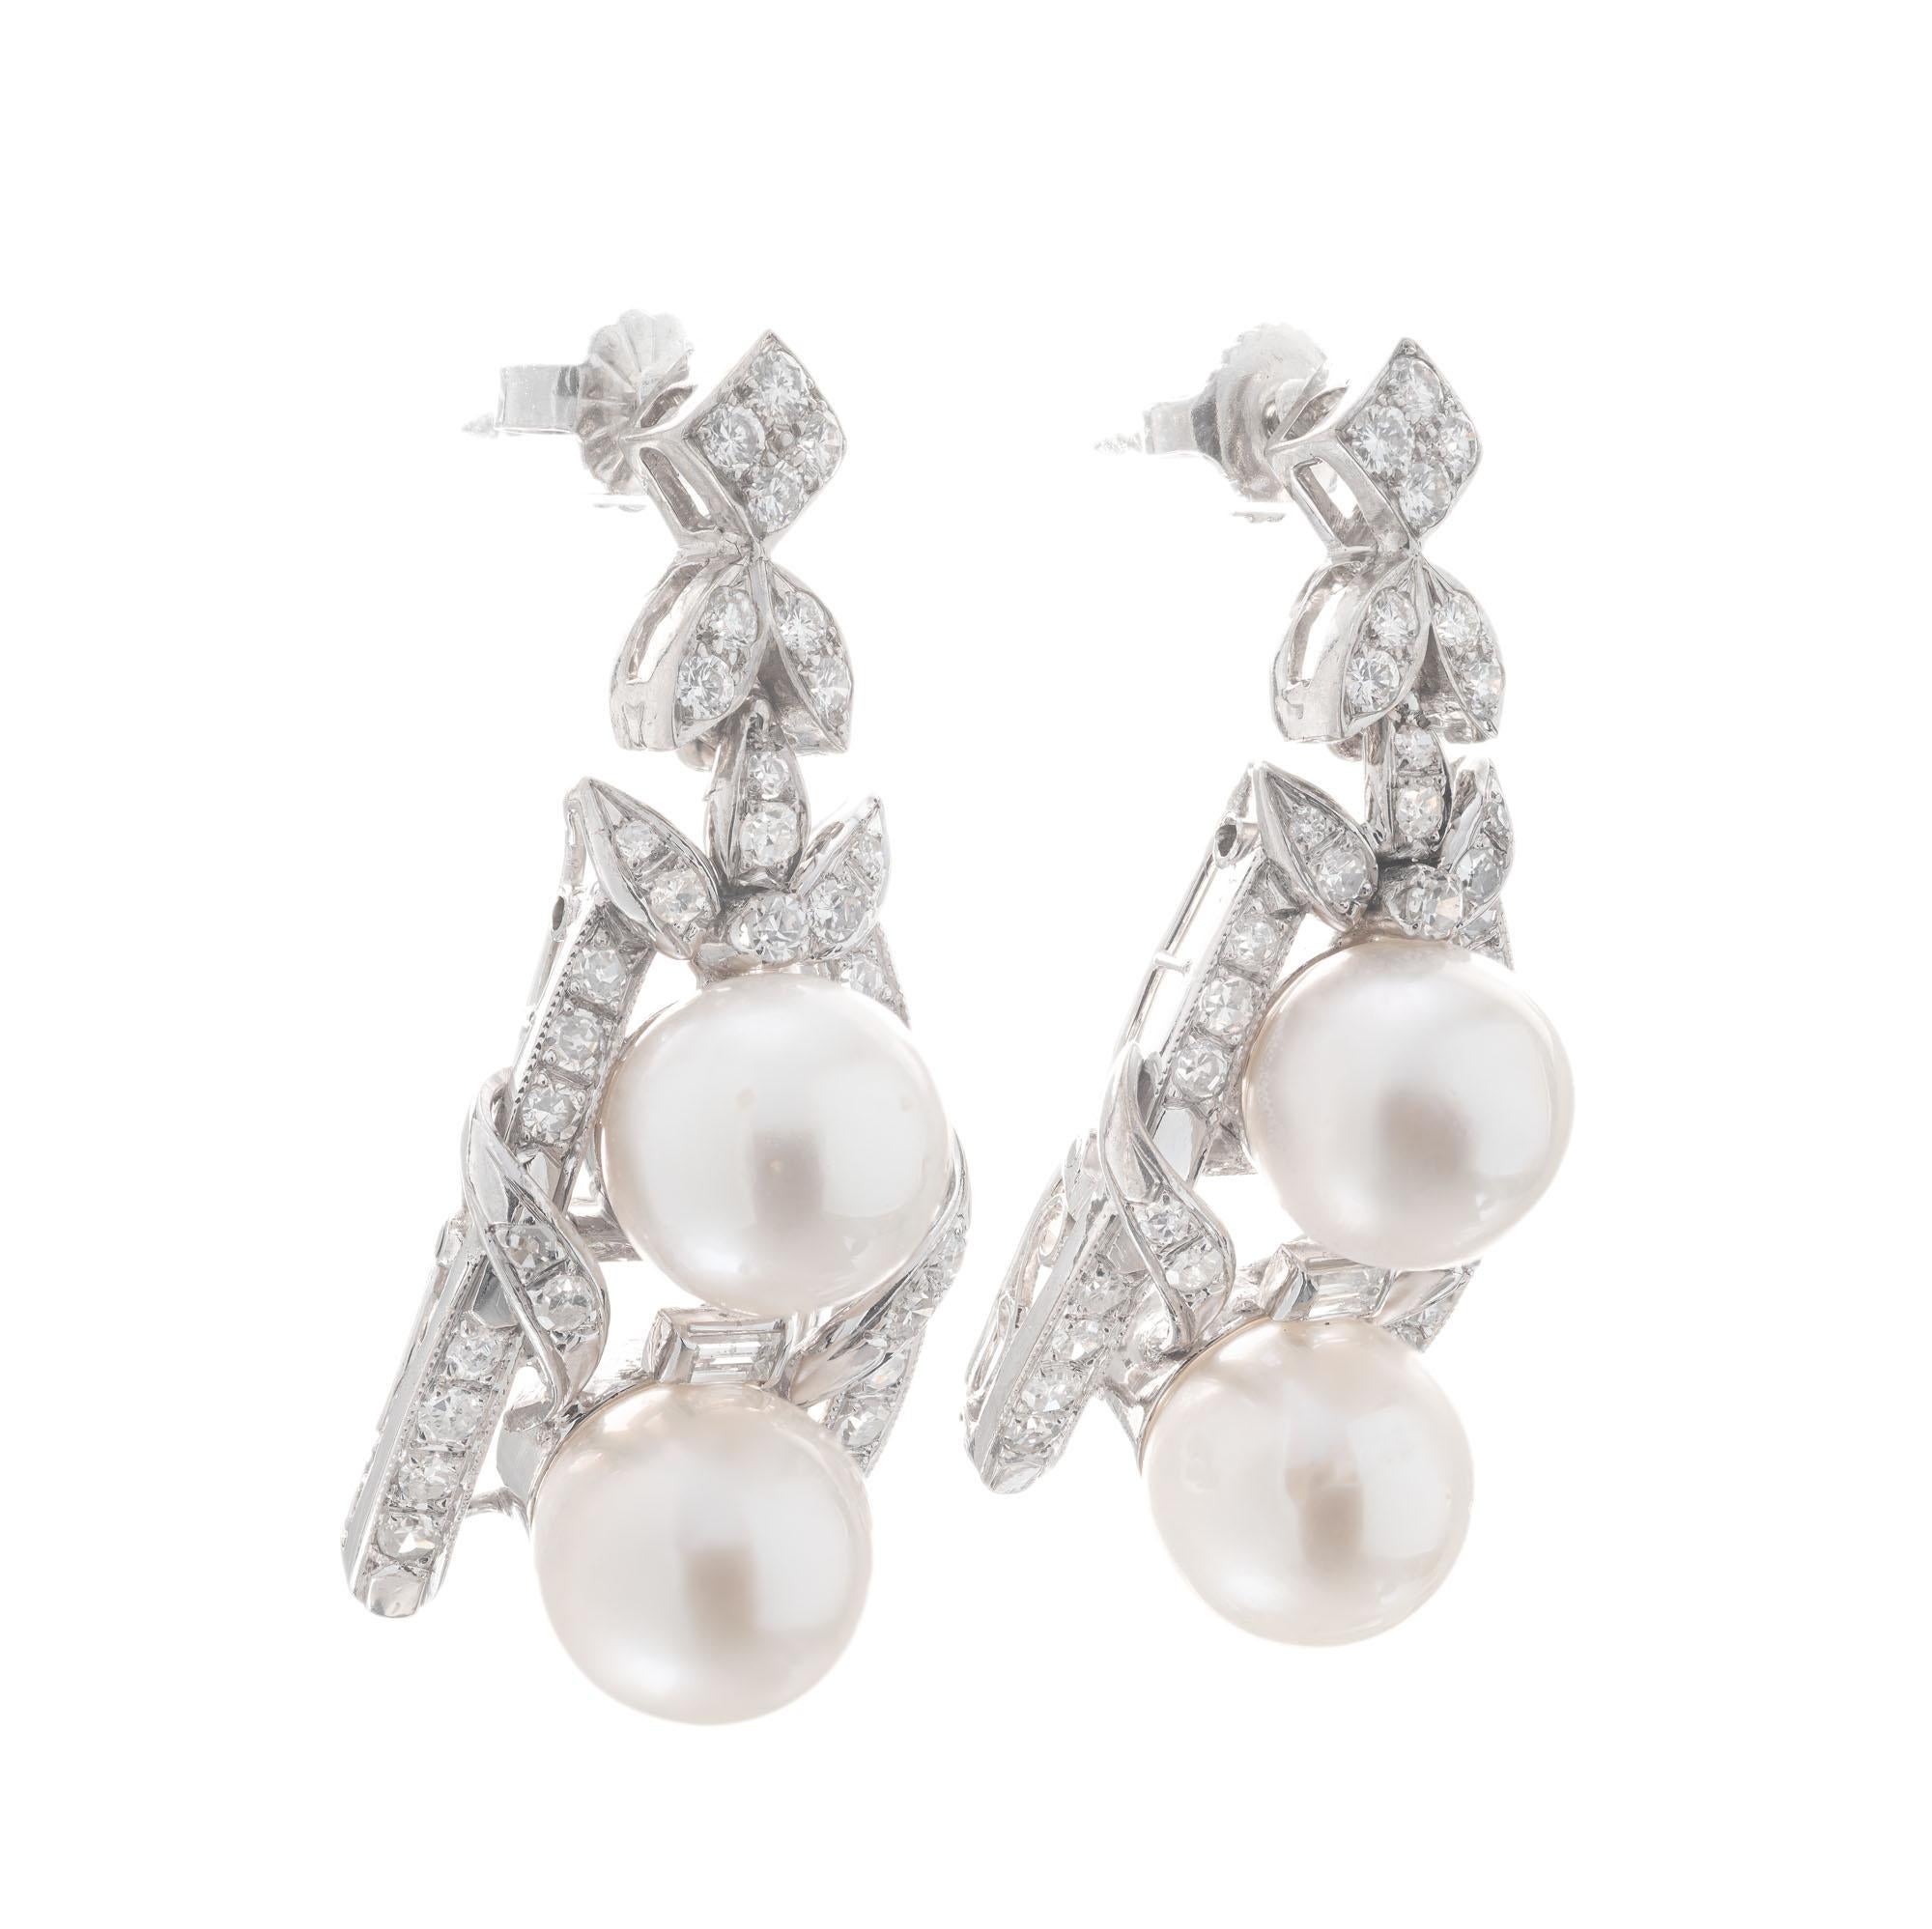 1960’s diamond a pearl dangle earrings. 4 round 8mm cultured pearls accented with 64 round brilliant cut and 2 baguette diamonds, in 14k white gold. 

4 cultured white gray pearls, 9mm
64 round brilliant cut diamonds, F-G SI approx. 1.50cts
2